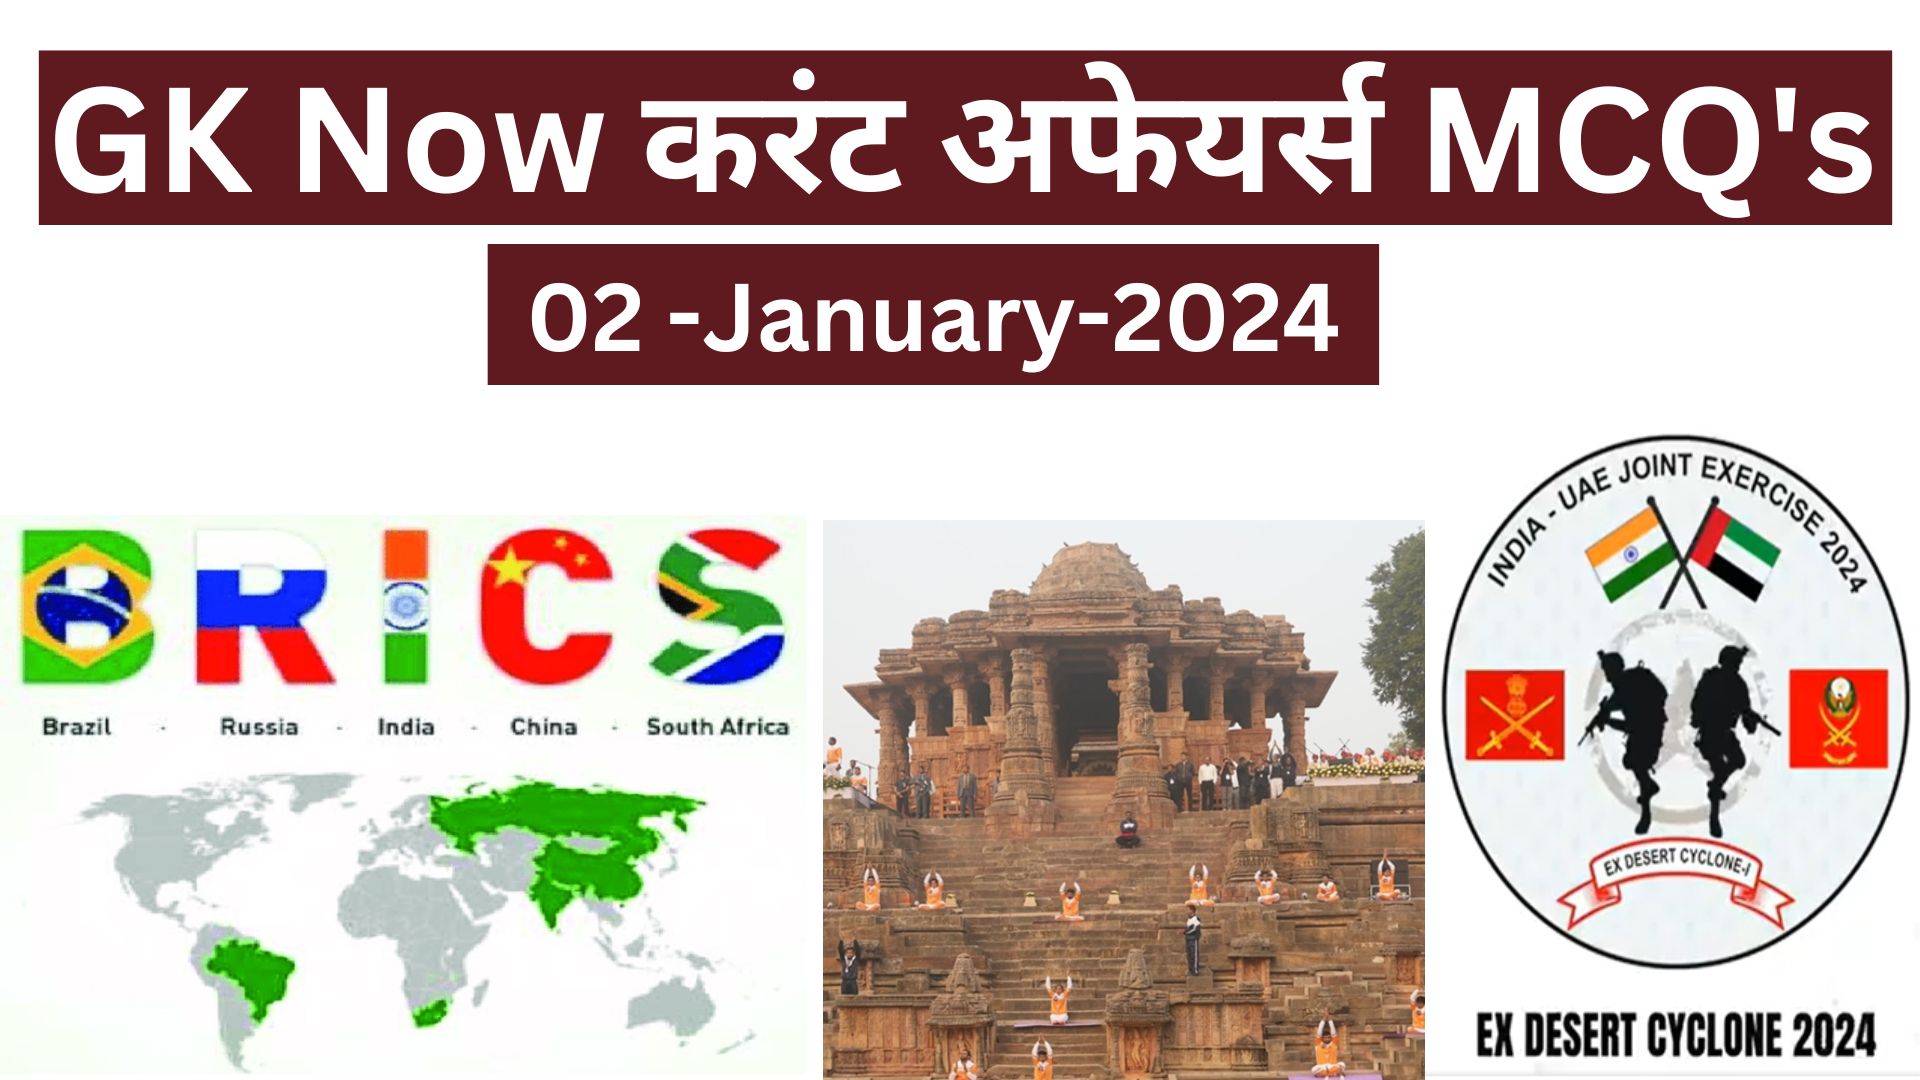 Daily Current Affairs MCQ 02 January 2024 GK Now